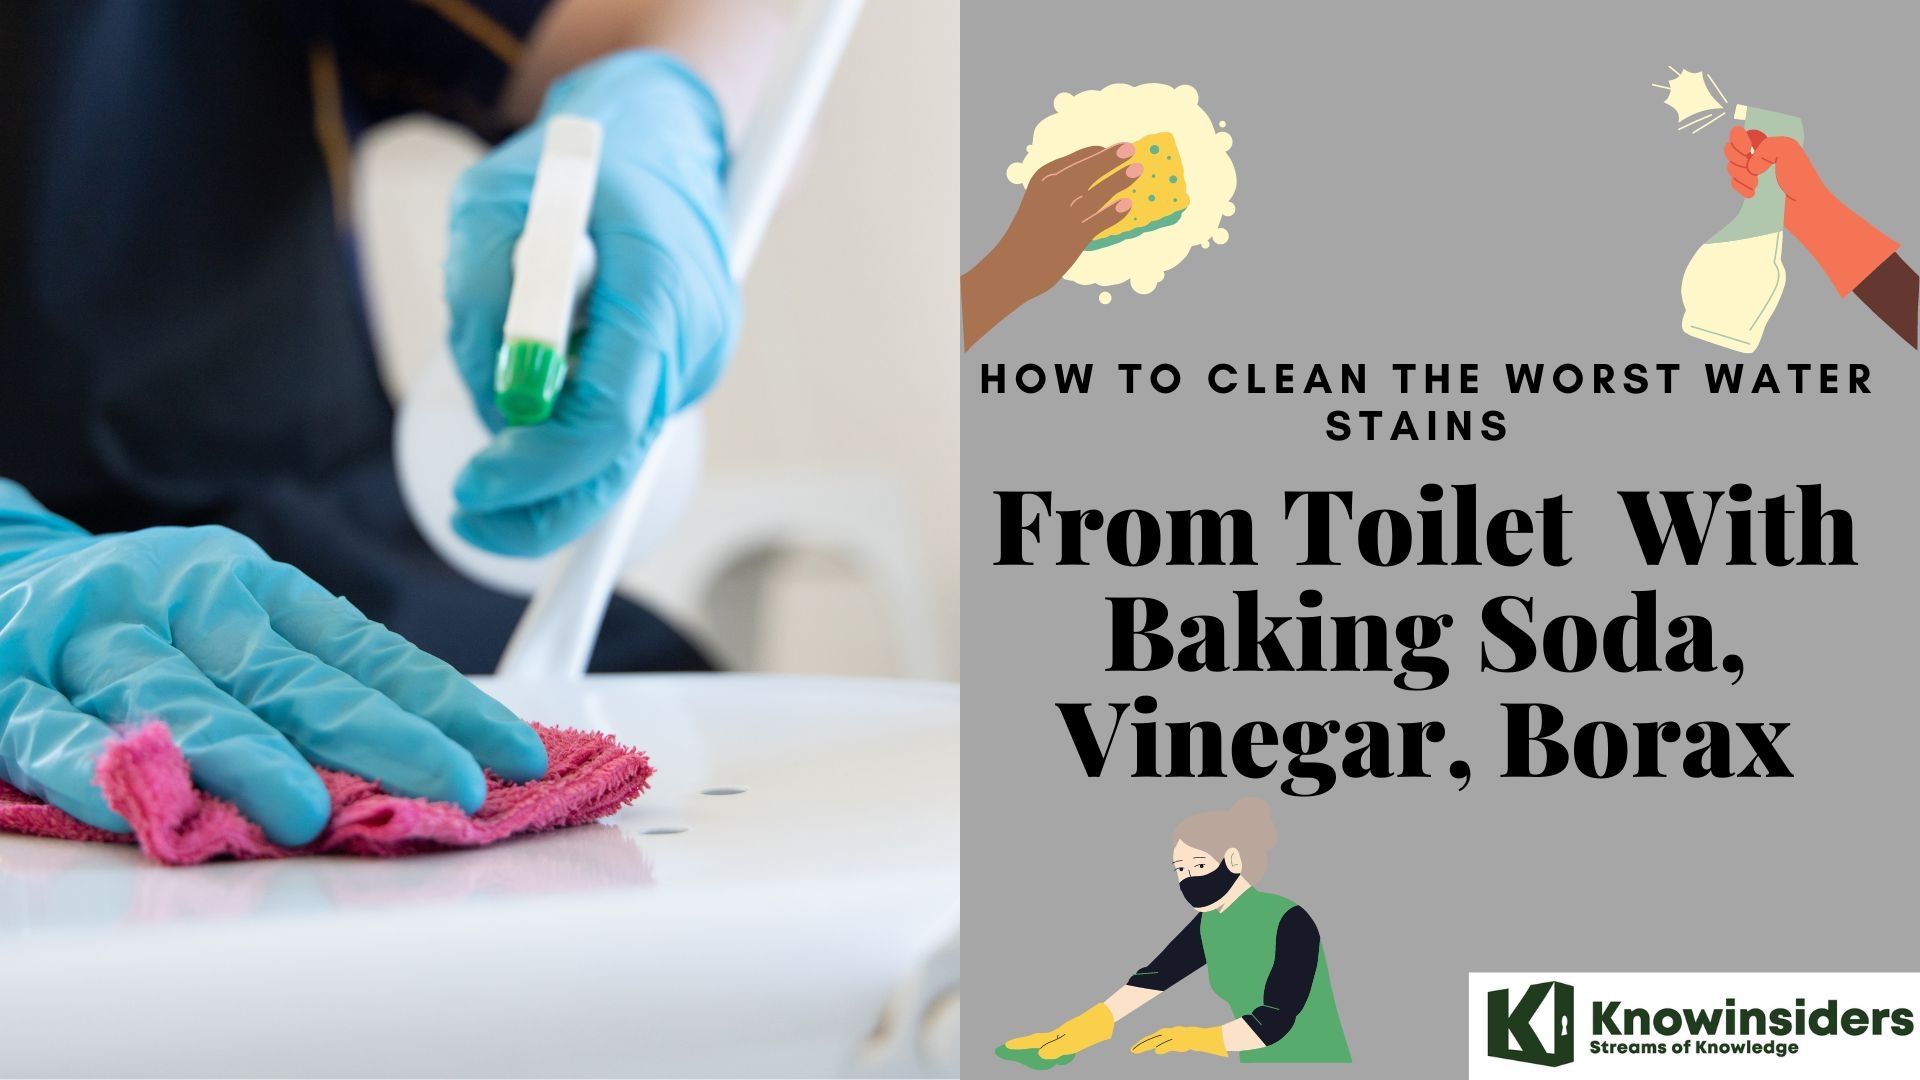 How To Clean the Worst Water Stains From Toilet By Baking Soda, Vinegar, Borax And Others  Knowinsiders.com